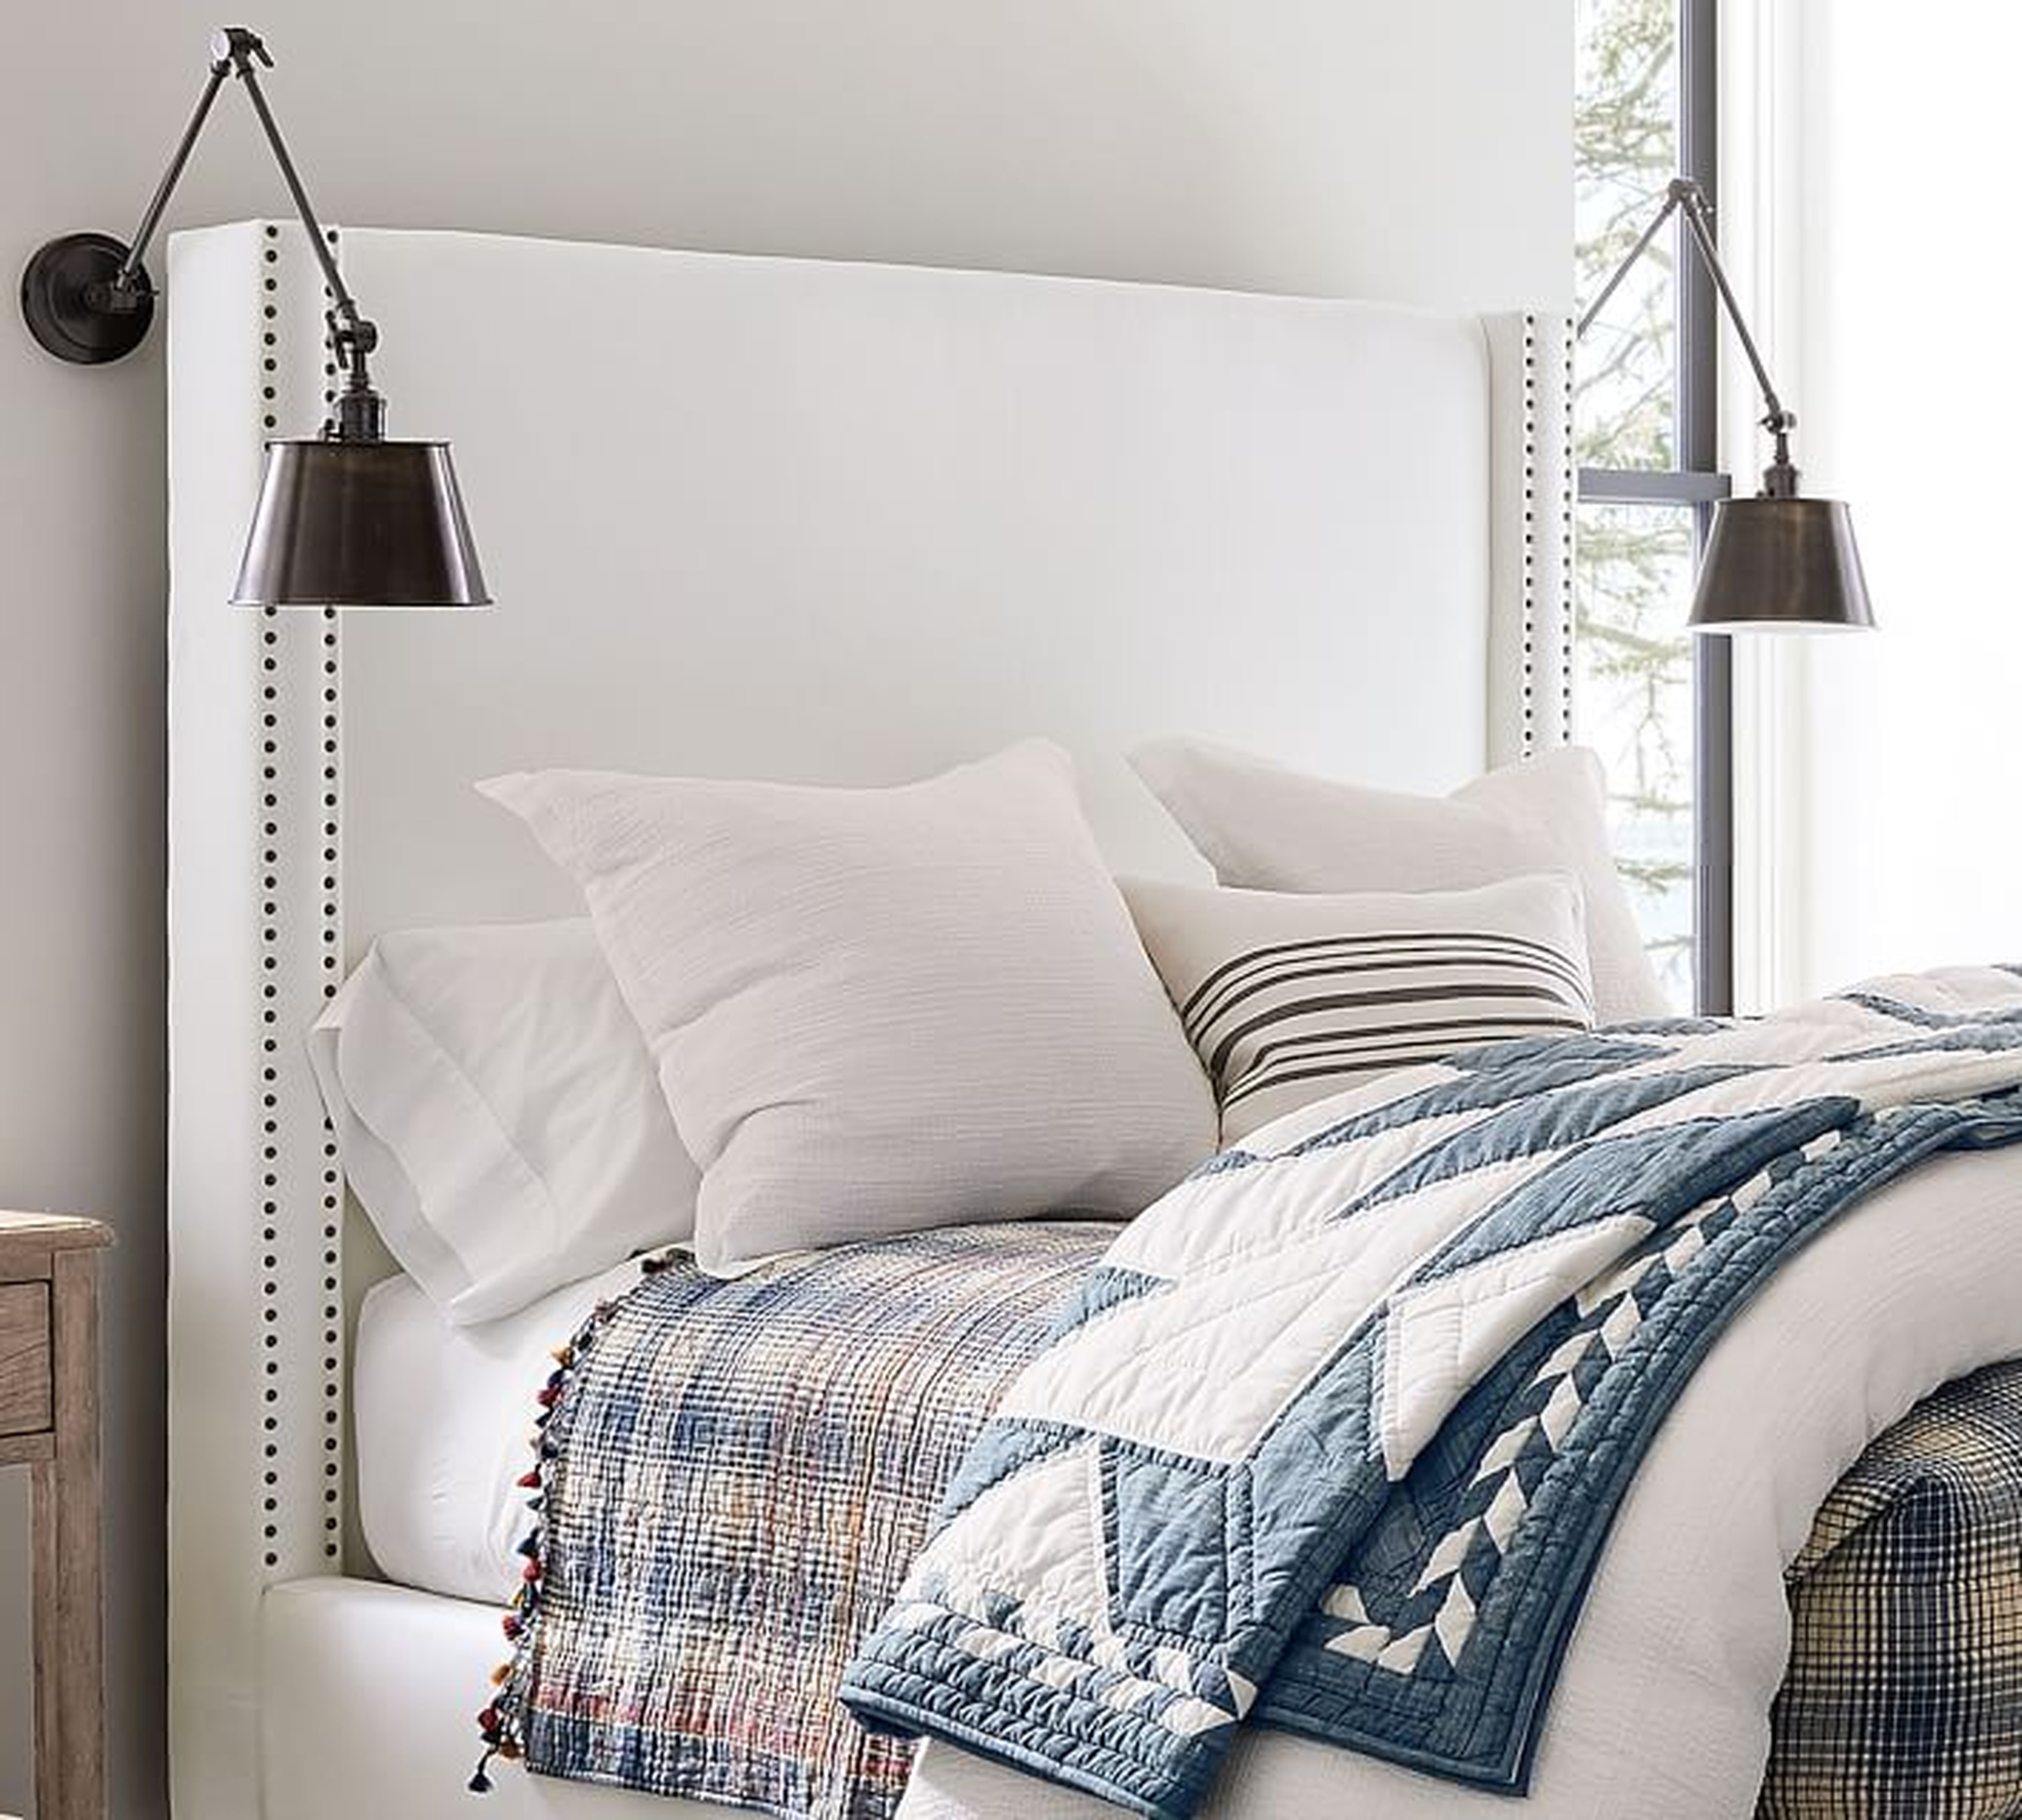 Harper Upholstered Non-Tufted Tall Bed without Nailheads, Queen, Basketweave Slub Ivory - Pottery Barn